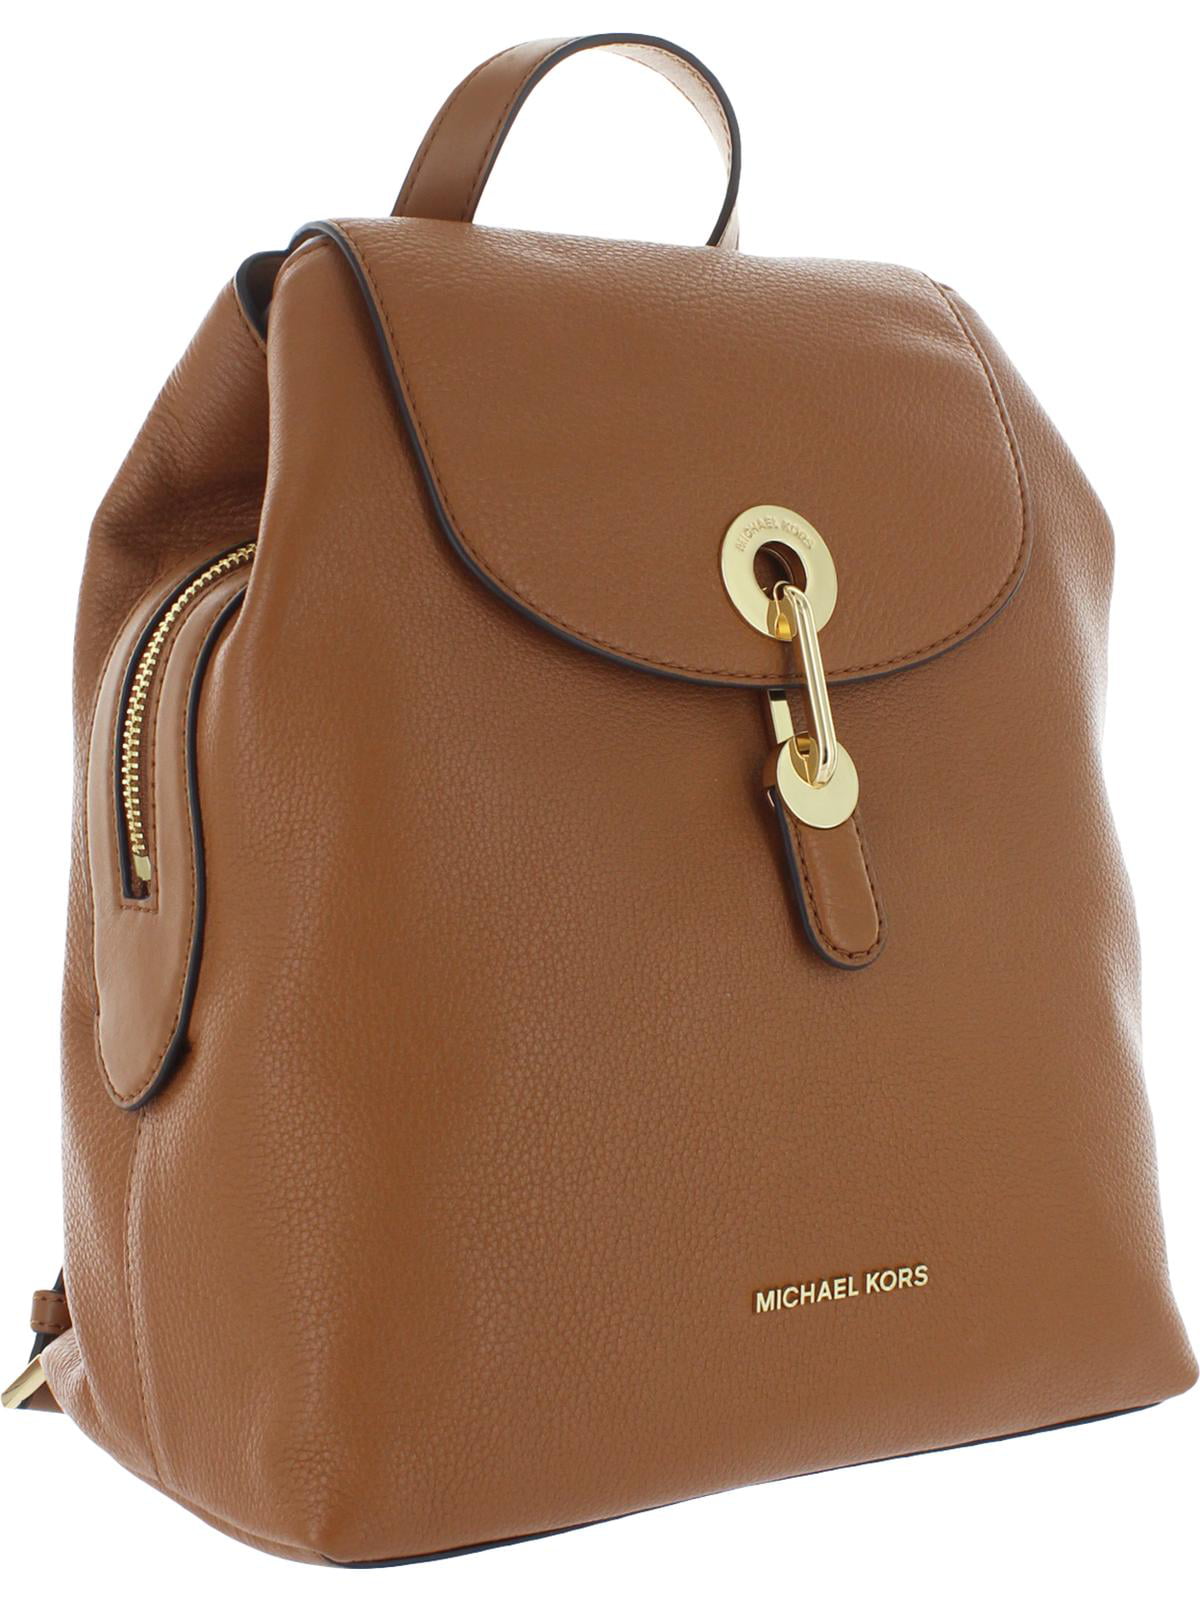 Michael Kors Raven Medium Pebbled Leather Backpack for Sale in Riverview  FL  OfferUp